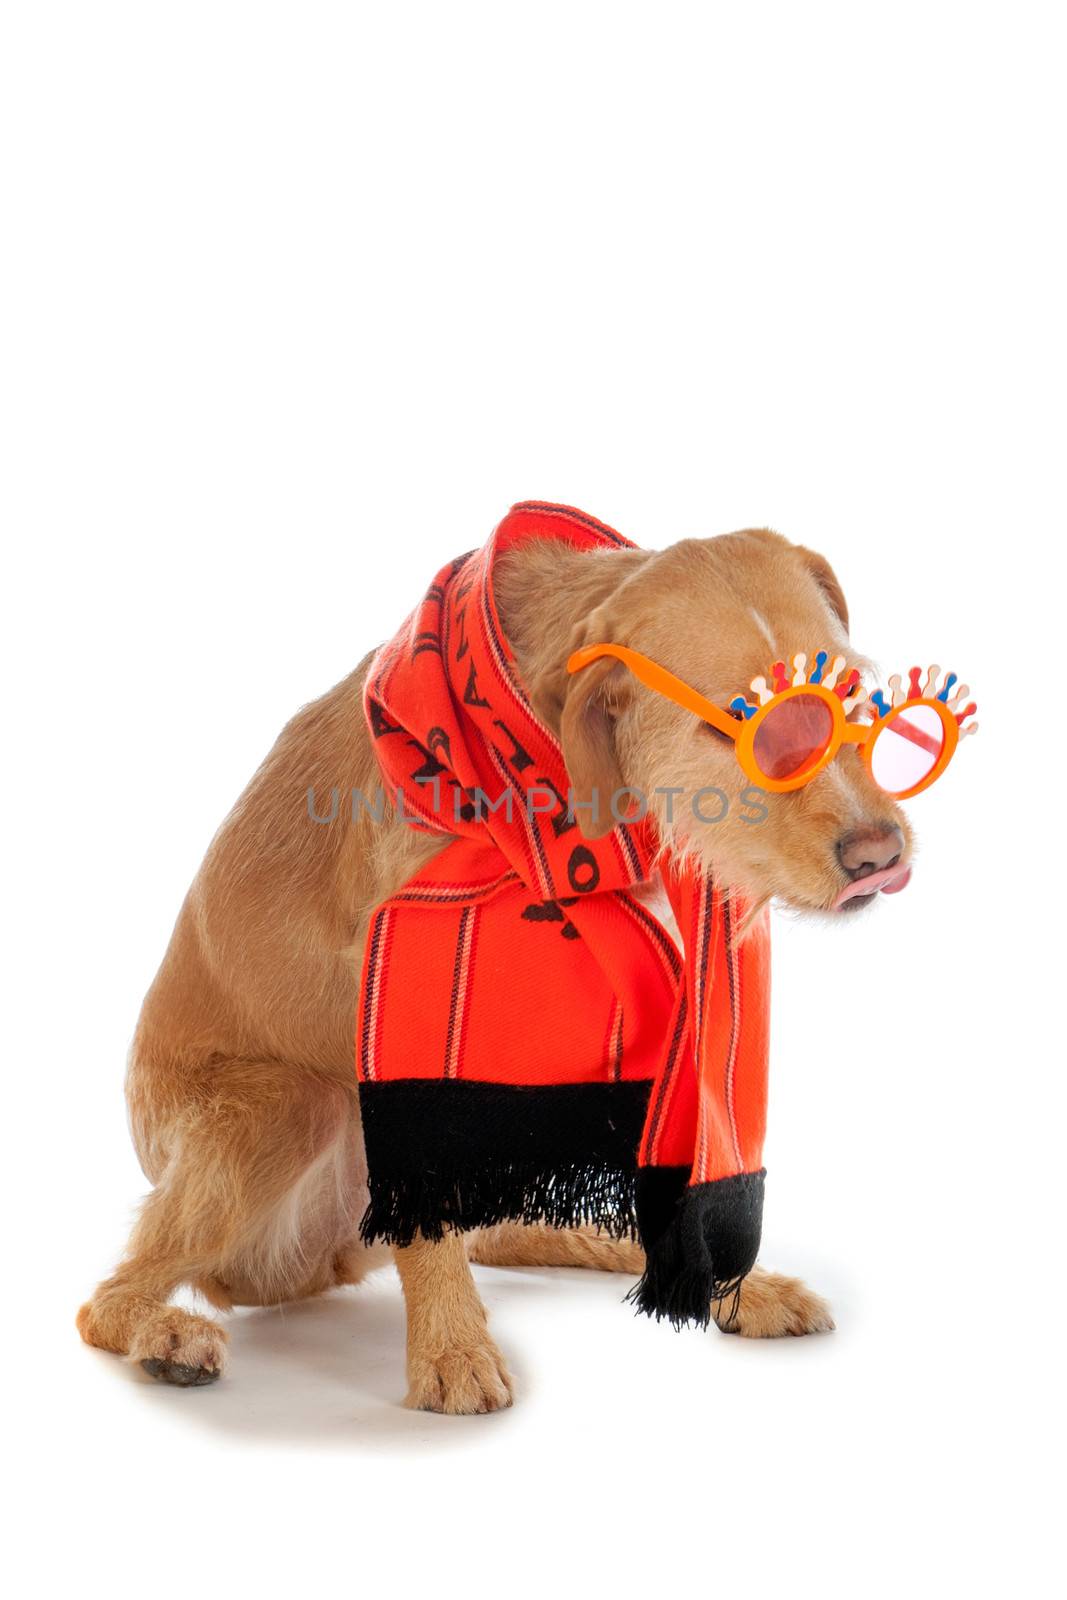 a brown dog, ready to suppport the dutch soccerteam!